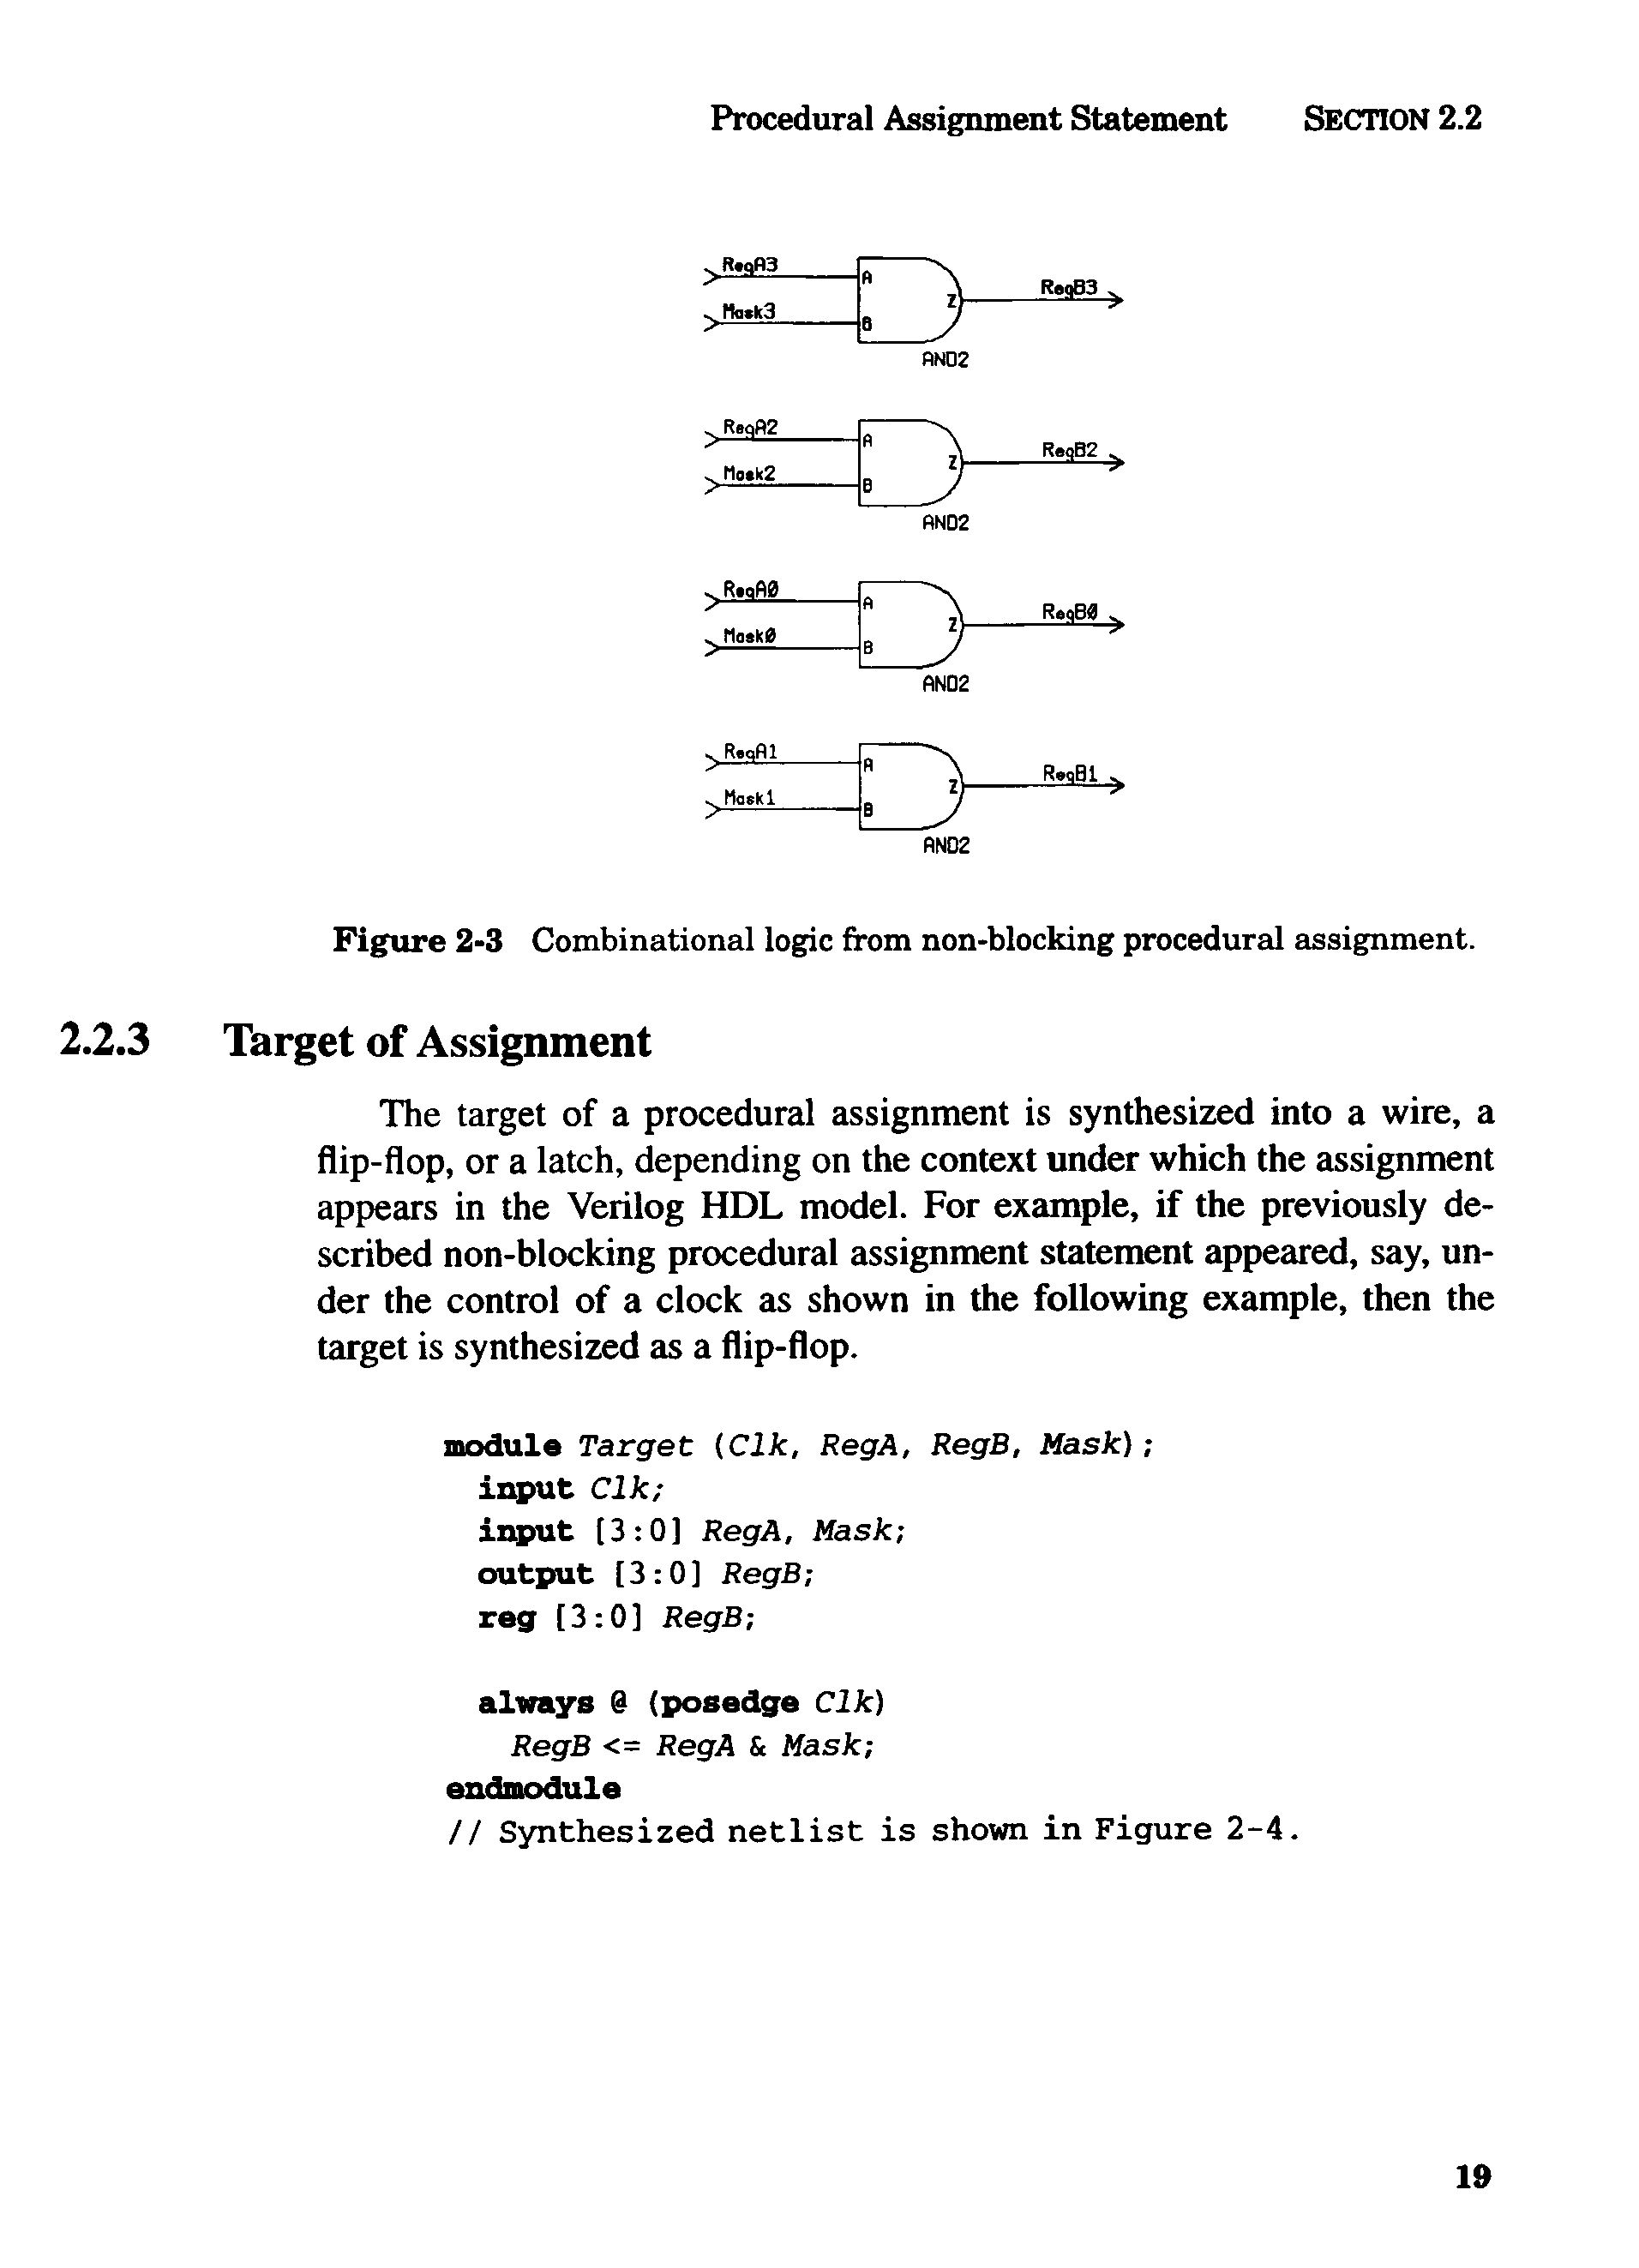 Figure 2-3 Combinational logic from non-blocking procedural assignment.